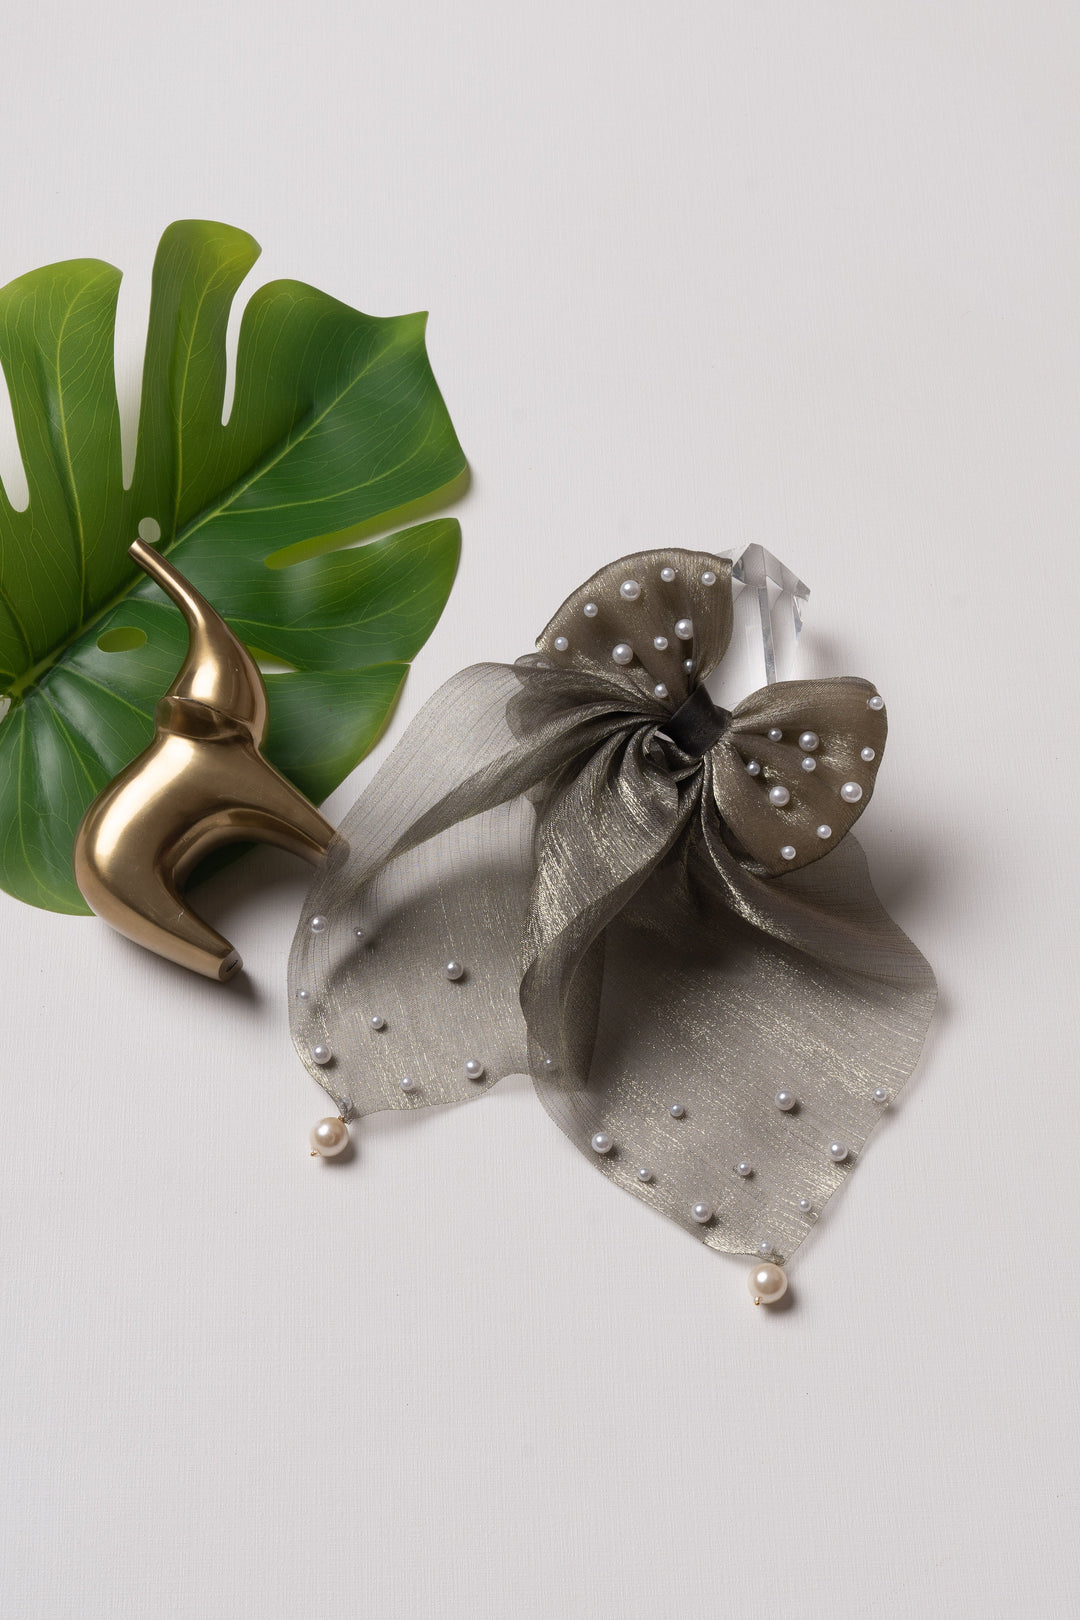 The Nesavu Scrunchies / Rubber Band Olive Green Shimmer Bow Hairband with Pearl Embellishments Nesavu Green JHS26D Olive Green Pearl Bow Hairband | Elegant Accessory | The Nesavu